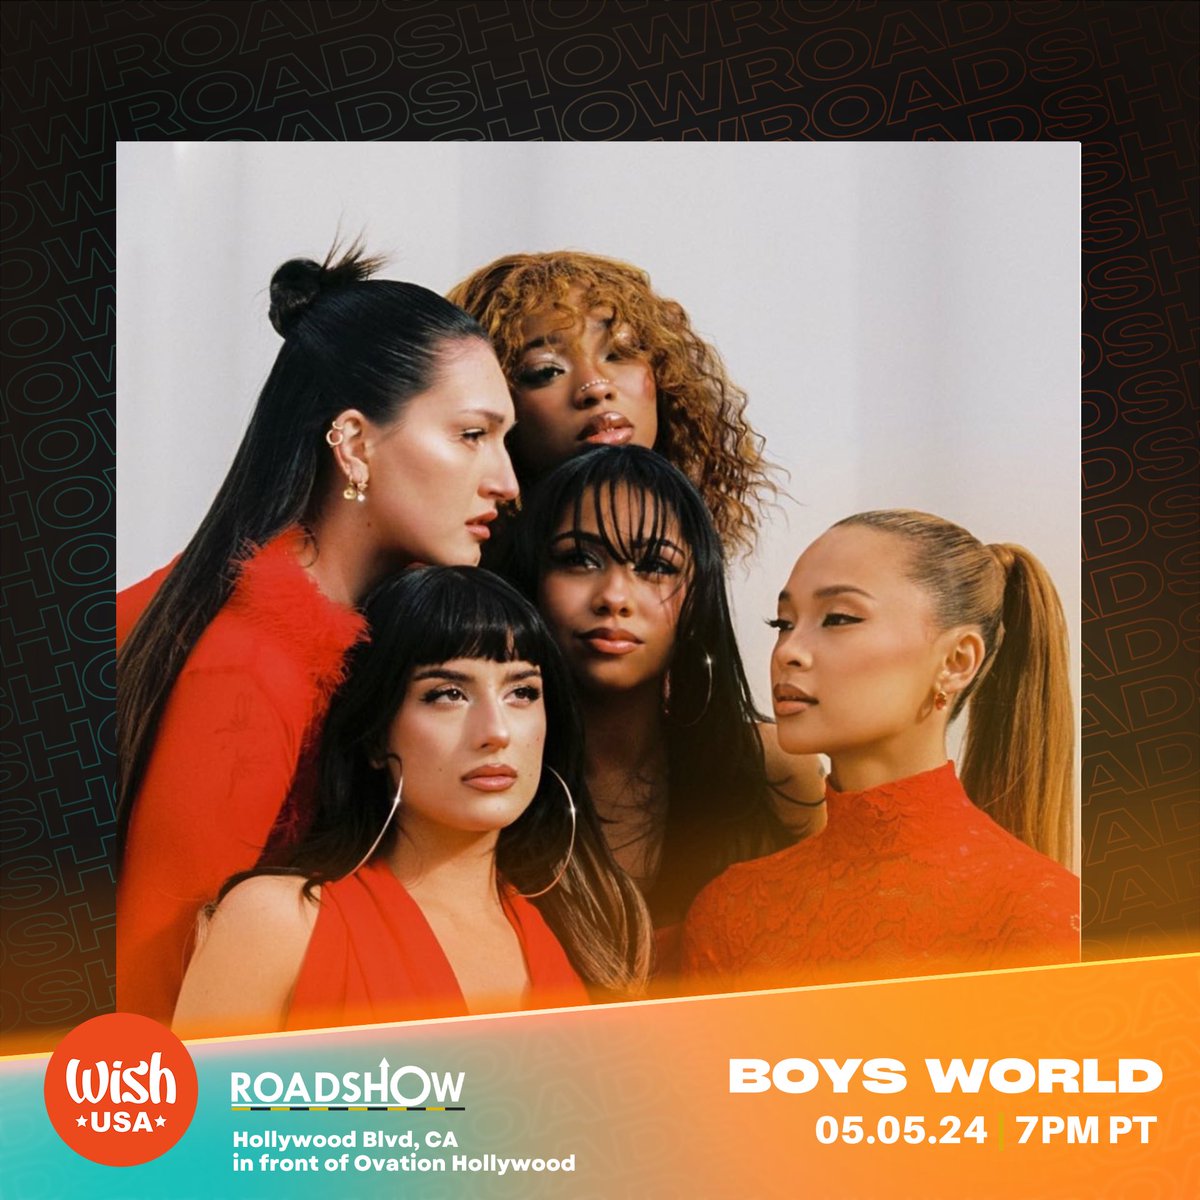 🔥 This Sunday! Boys World is gonna light up the stage in front of Ovation Hollywood at 7pm! 🎤🎶 Don’t miss out! 🎉 #BoysWorldLive

#BoysWorld #LiveMusic #HollywoodNights #OvationHollywood #SundayFunday #ConcertVibes #MusicLovers #PopMusic #LivePerformance #MusicScene #TuneIn